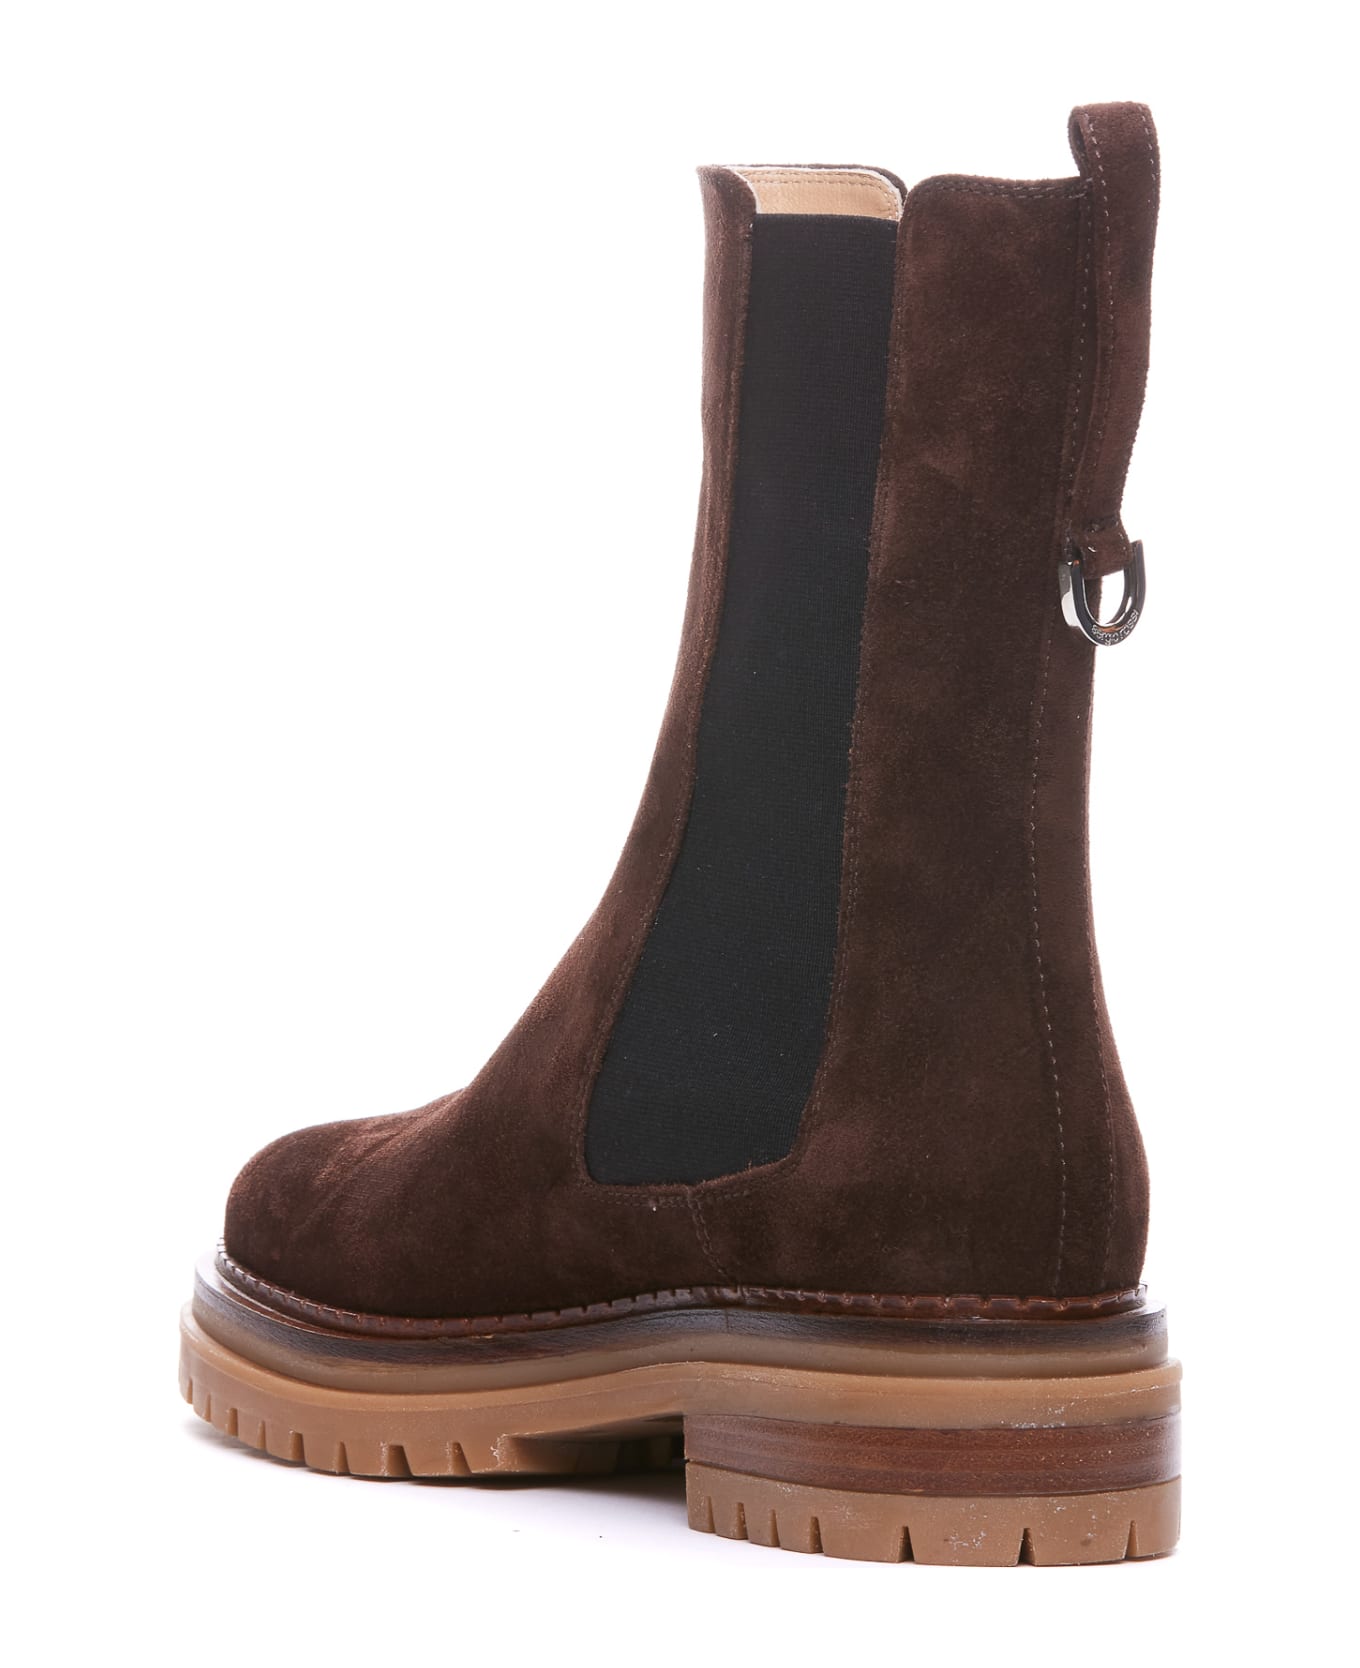 Sergio Rossi Booties - Brown